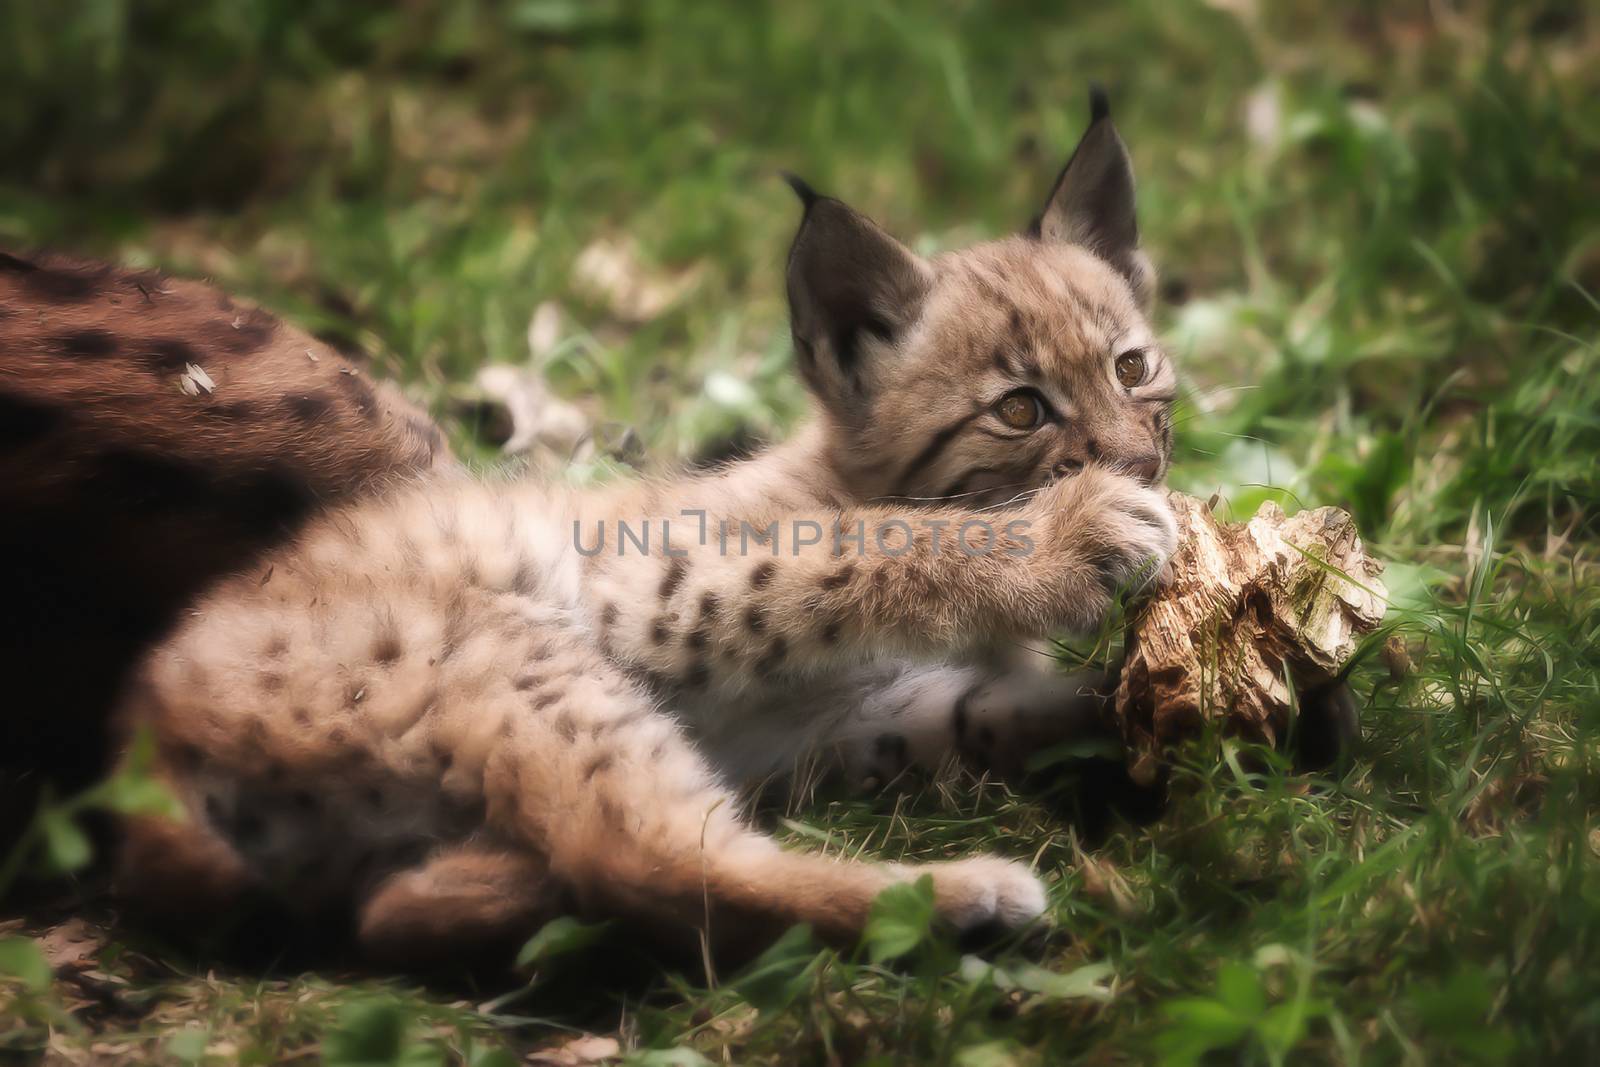 Young lynx bobcat playing with wood in the grass